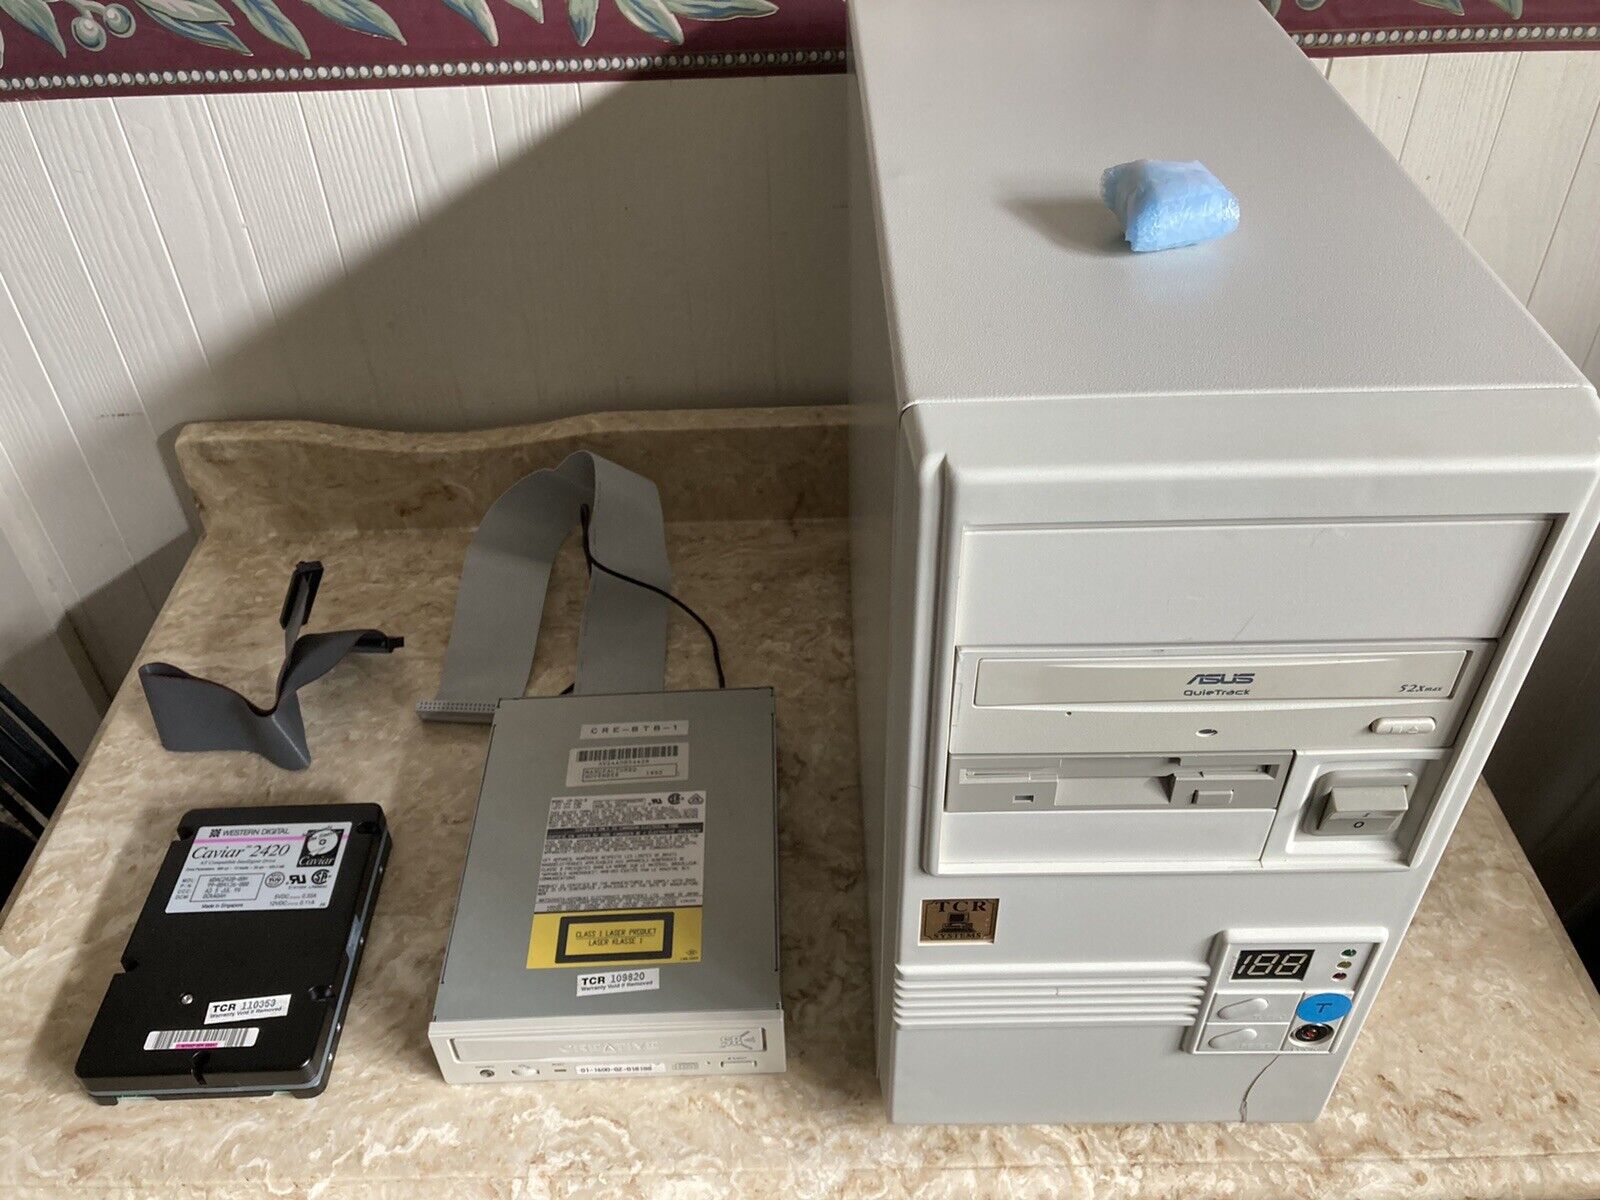 Working Vintage 486 DX TCR Generic Desktop AT Computer With Windows 95